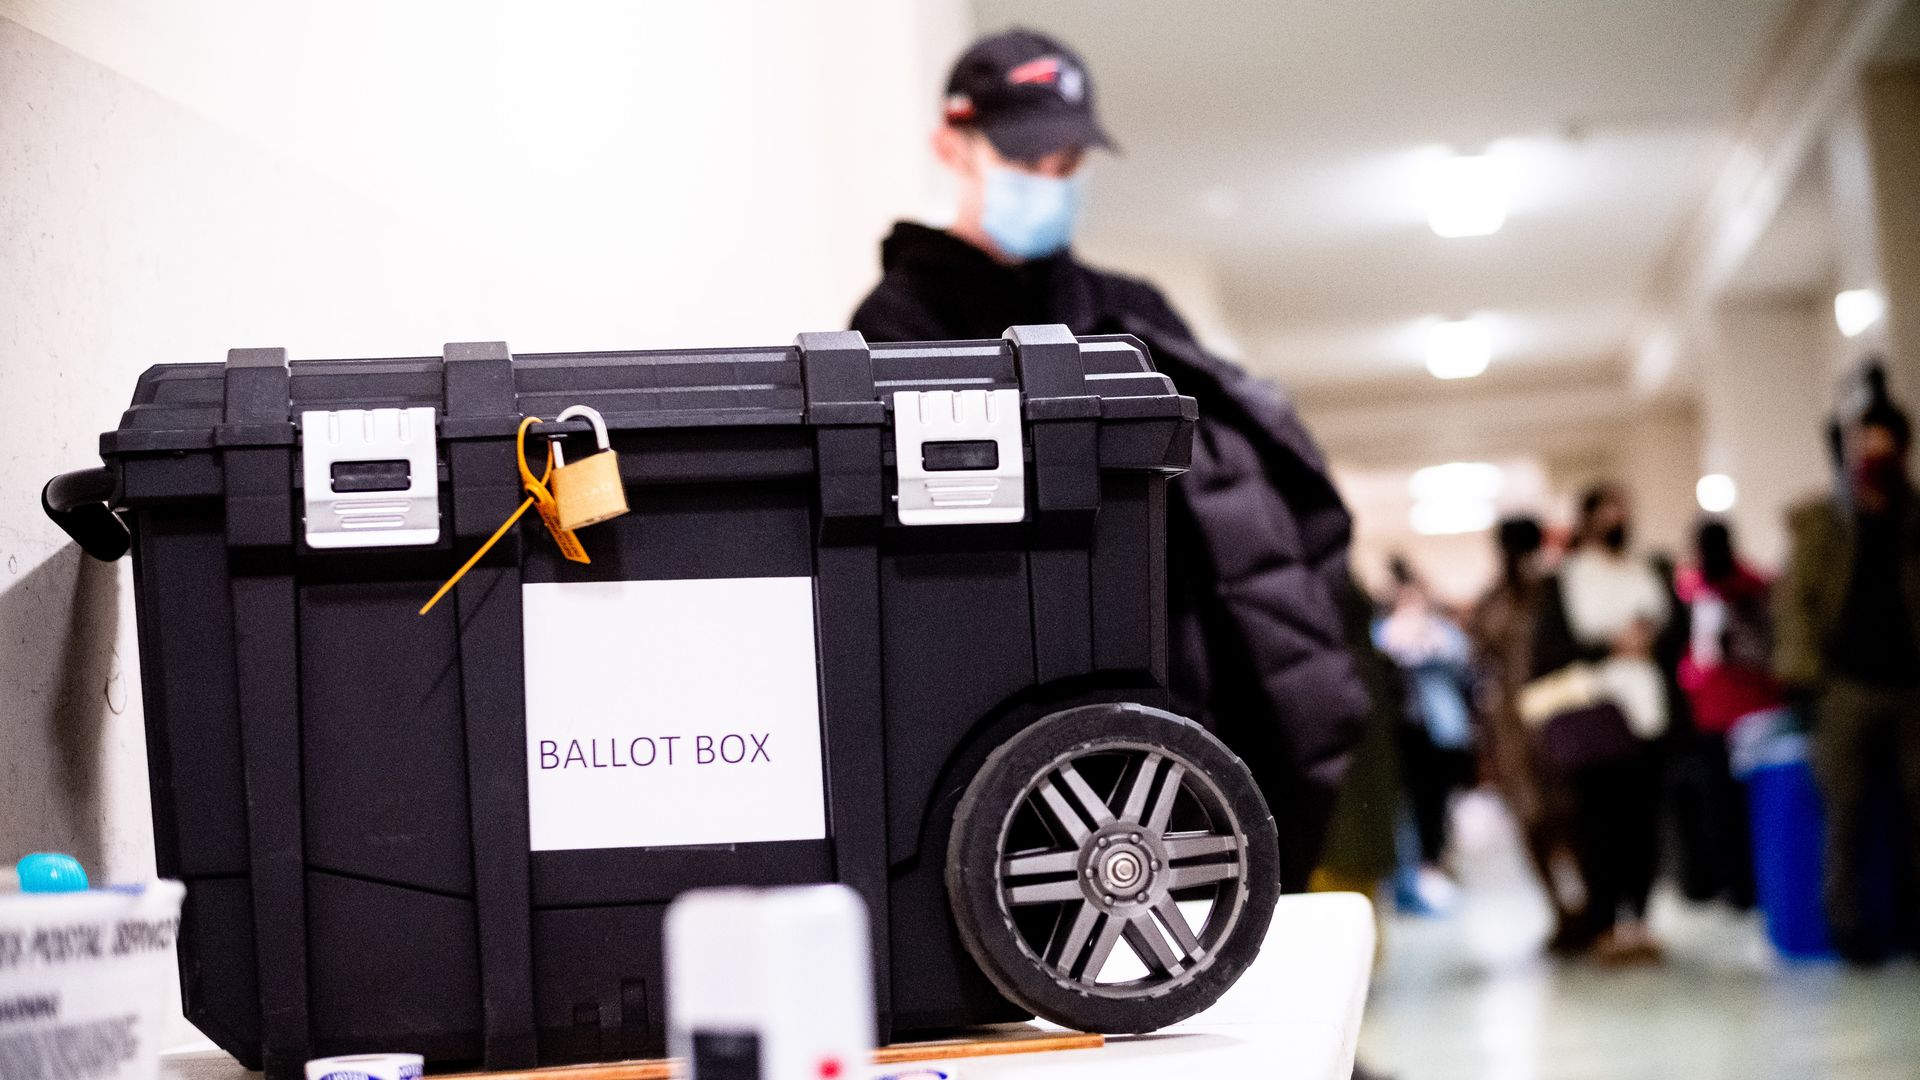 An official ballot box and the setup around it ahead of the presidential elections in Pittsburgh, Penn., in November 2020